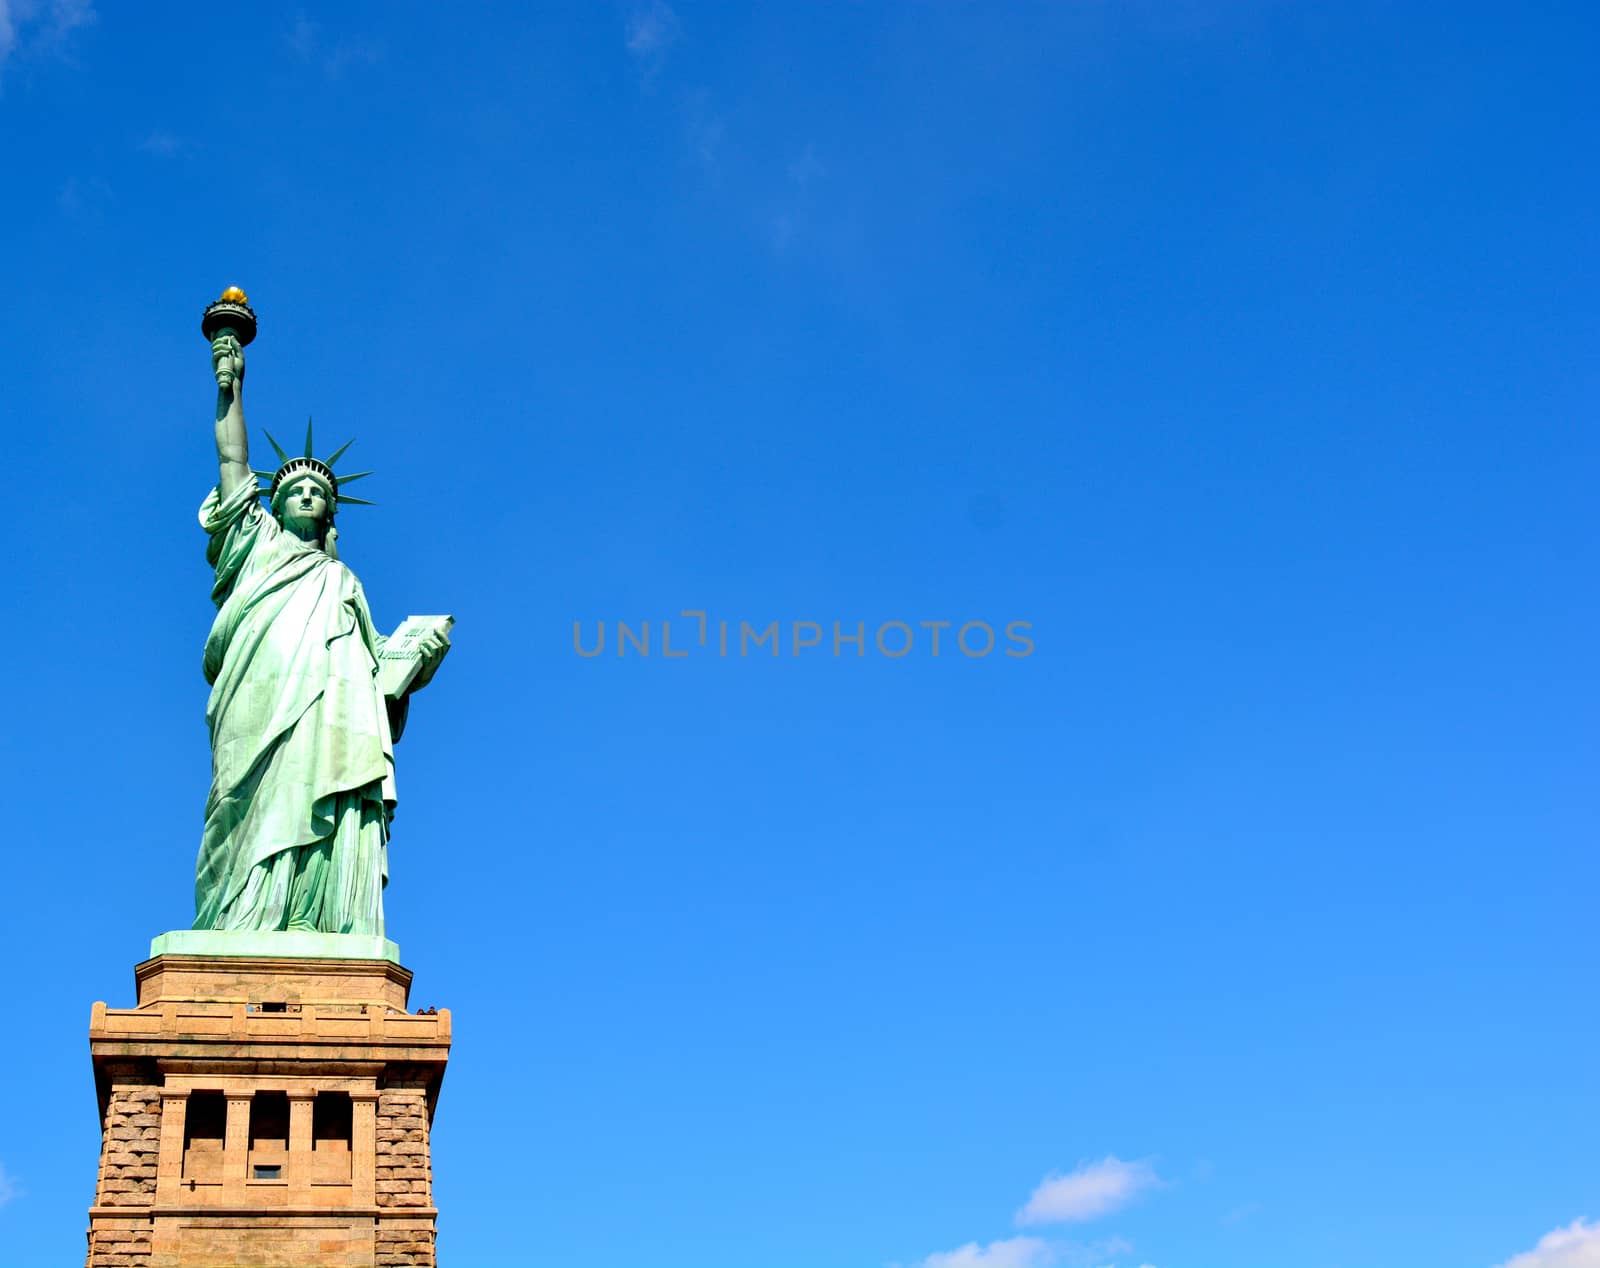 Statue of Liberty - New York City  - 03 by RefocusPhoto